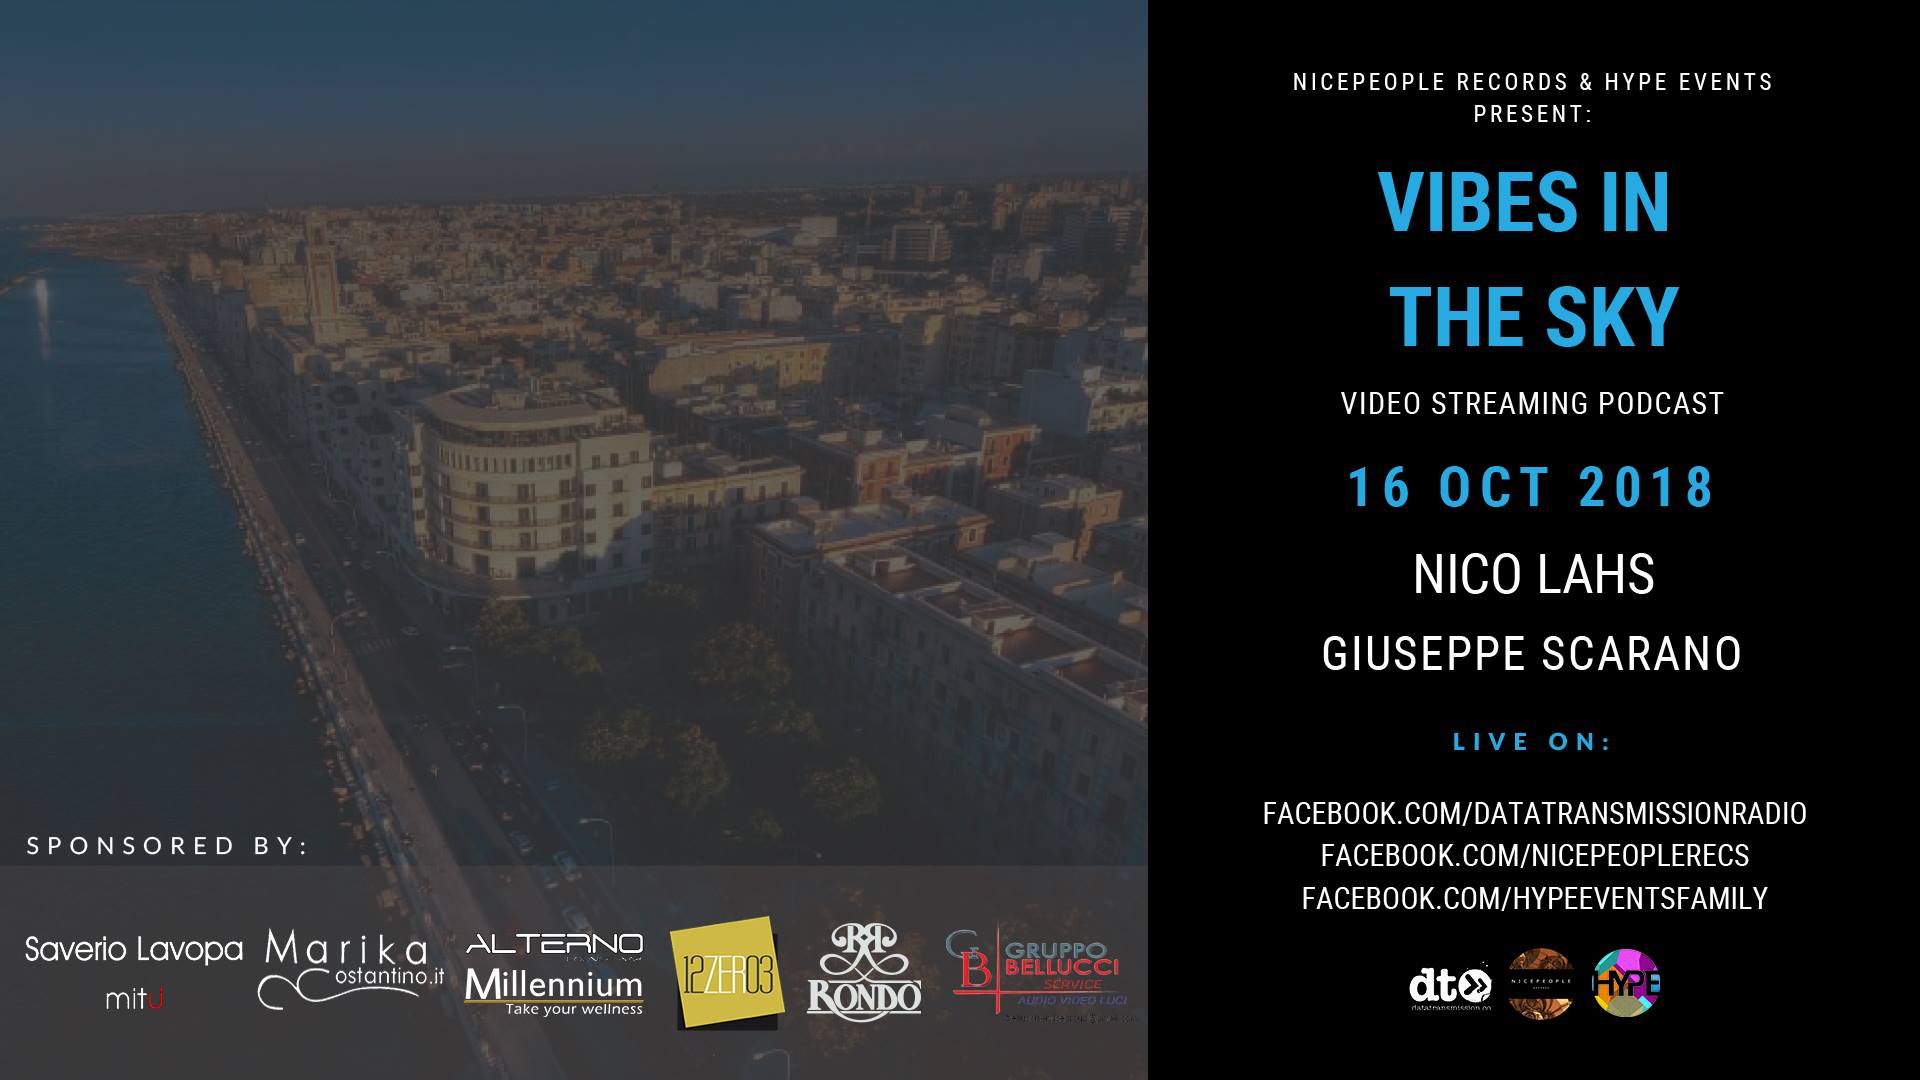 Vibes in the sky with Nico Lahs and Giuseppe Scarano - Event Flyer